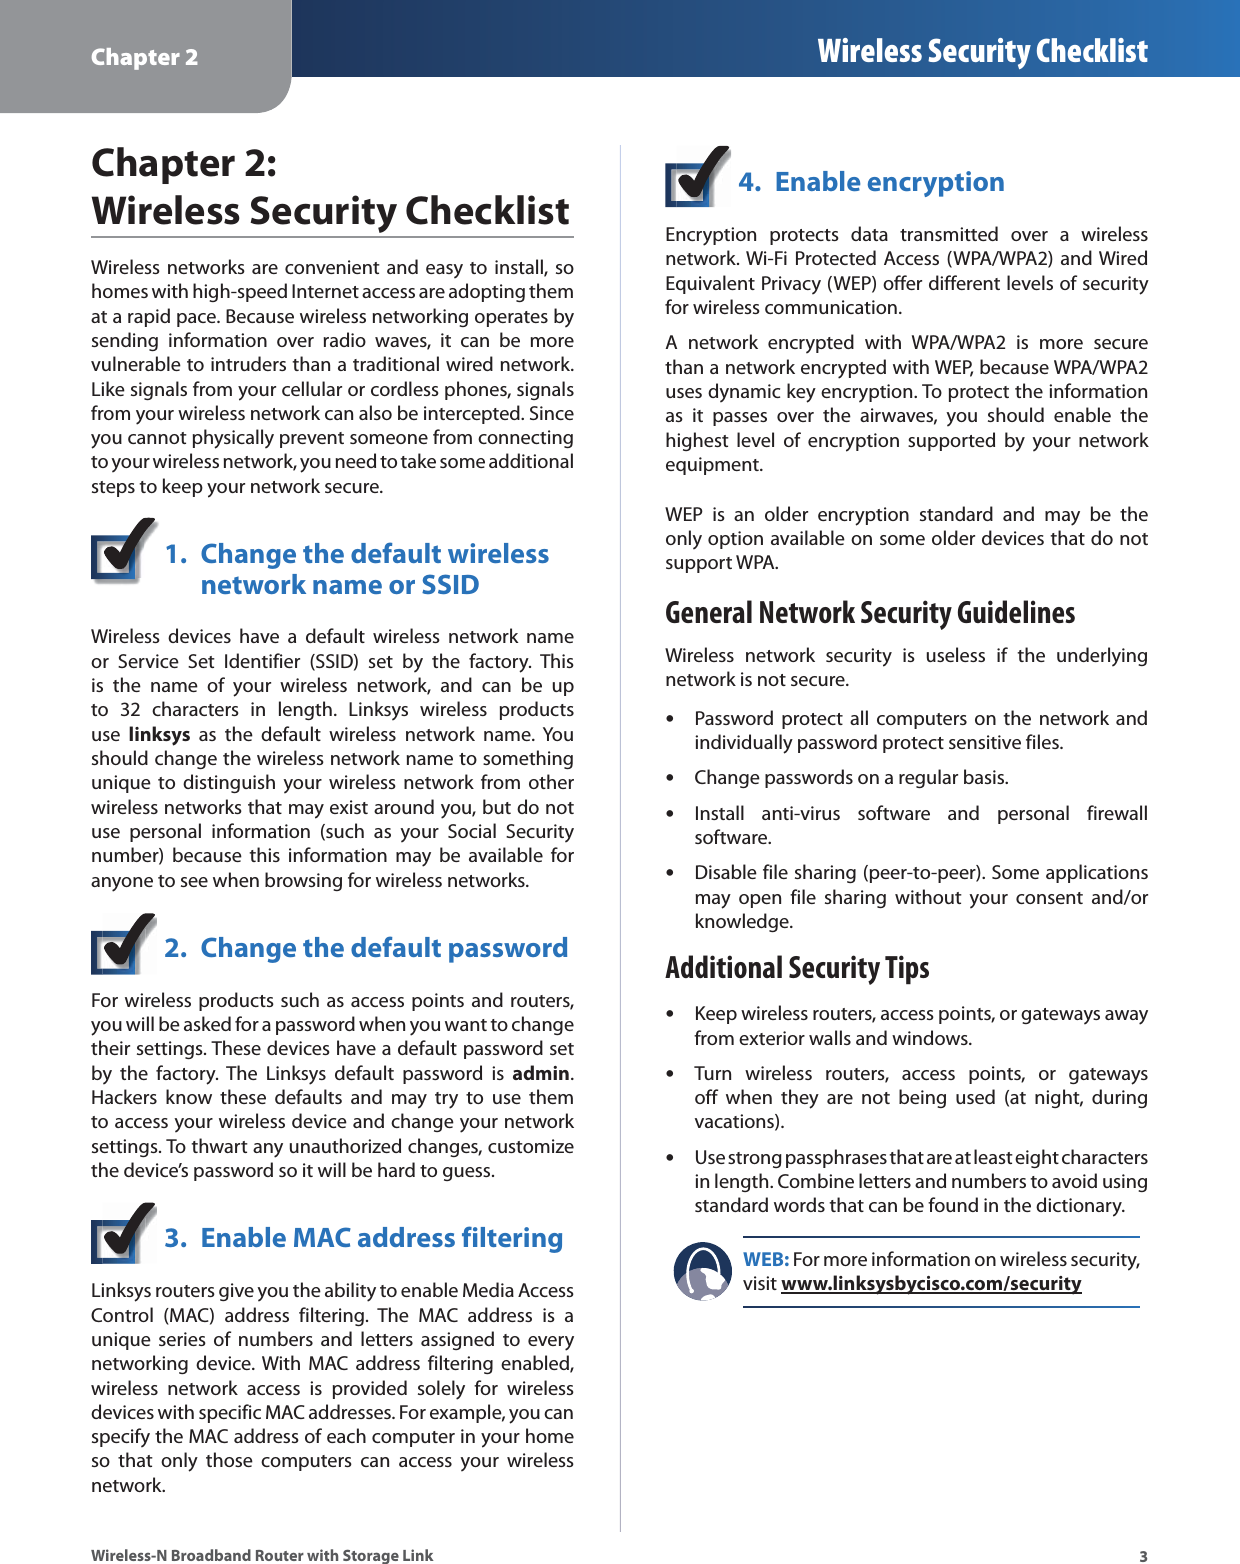 Chapter 2 Wireless Security Checklist3Wireless-N Broadband Router with Storage LinkChapter 2: Wireless Security ChecklistWireless networks are convenient and easy to install, so homes with high-speed Internet access are adopting them at a rapid pace. Because wireless networking operates by sending information over radio waves, it can be more vulnerable to intruders than a traditional wired network. Like signals from your cellular or cordless phones, signals from your wireless network can also be intercepted. Since you cannot physically prevent someone from connecting to your wireless network, you need to take some additional steps to keep your network secure. 1.  Change the default wireless  network name or SSIDWireless devices have a default wireless network name or Service Set Identifier (SSID) set by the factory. This is the name of your wireless network, and can be up to 32 characters in length. Linksys wireless products use  linksys as the default wireless network name. You should change the wireless network name to something unique to distinguish your wireless network from other wireless networks that may exist around you, but do not use personal information (such as your Social Security number) because this information may be available for anyone to see when browsing for wireless networks. 2.  Change the default passwordFor wireless products such as access points and routers, you will be asked for a password when you want to change their settings. These devices have a default password set by the factory. The Linksys default password is admin. Hackers know these defaults and may try to use them to access your wireless device and change your network settings. To thwart any unauthorized changes, customize the device’s password so it will be hard to guess.3.  Enable MAC address filteringLinksys routers give you the ability to enable Media Access Control (MAC) address filtering. The MAC address is a unique series of numbers and letters assigned to every networking device. With MAC address filtering enabled, wireless network access is provided solely for wireless devices with specific MAC addresses. For example, you can specify the MAC address of each computer in your home so that only those computers can access your wireless network. 4.  Enable encryptionEncryption protects data transmitted over a wireless network. Wi-Fi Protected Access (WPA/WPA2) and Wired Equivalent Privacy (WEP) offer different levels of security for wireless communication.A network encrypted with WPA/WPA2 is more secure than a network encrypted with WEP, because WPA/WPA2 uses dynamic key encryption. To protect the information as it passes over the airwaves, you should enable the highest level of encryption supported by your network equipment. WEP is an older encryption standard and may be the only option available on some older devices that do not support WPA.General Network Security GuidelinesWireless network security is useless if the underlying network is not secure. Password protect all computers on the network and sindividually password protect sensitive files.Change passwords on a regular basis.sInstall anti-virus software and personal firewall ssoftware.Disable file sharing (peer-to-peer). Some applications smay open file sharing without your consent and/or knowledge.Additional Security TipsKeep wireless routers, access points, or gateways away sfrom exterior walls and windows.Turn wireless routers, access points, or gateways soff when they are not being used (at night, during vacations).Use strong passphrases that are at least eight characters sin length. Combine letters and numbers to avoid using standard words that can be found in the dictionary. WEB: For more information on wireless security, visit www.linksysbycisco.com/security